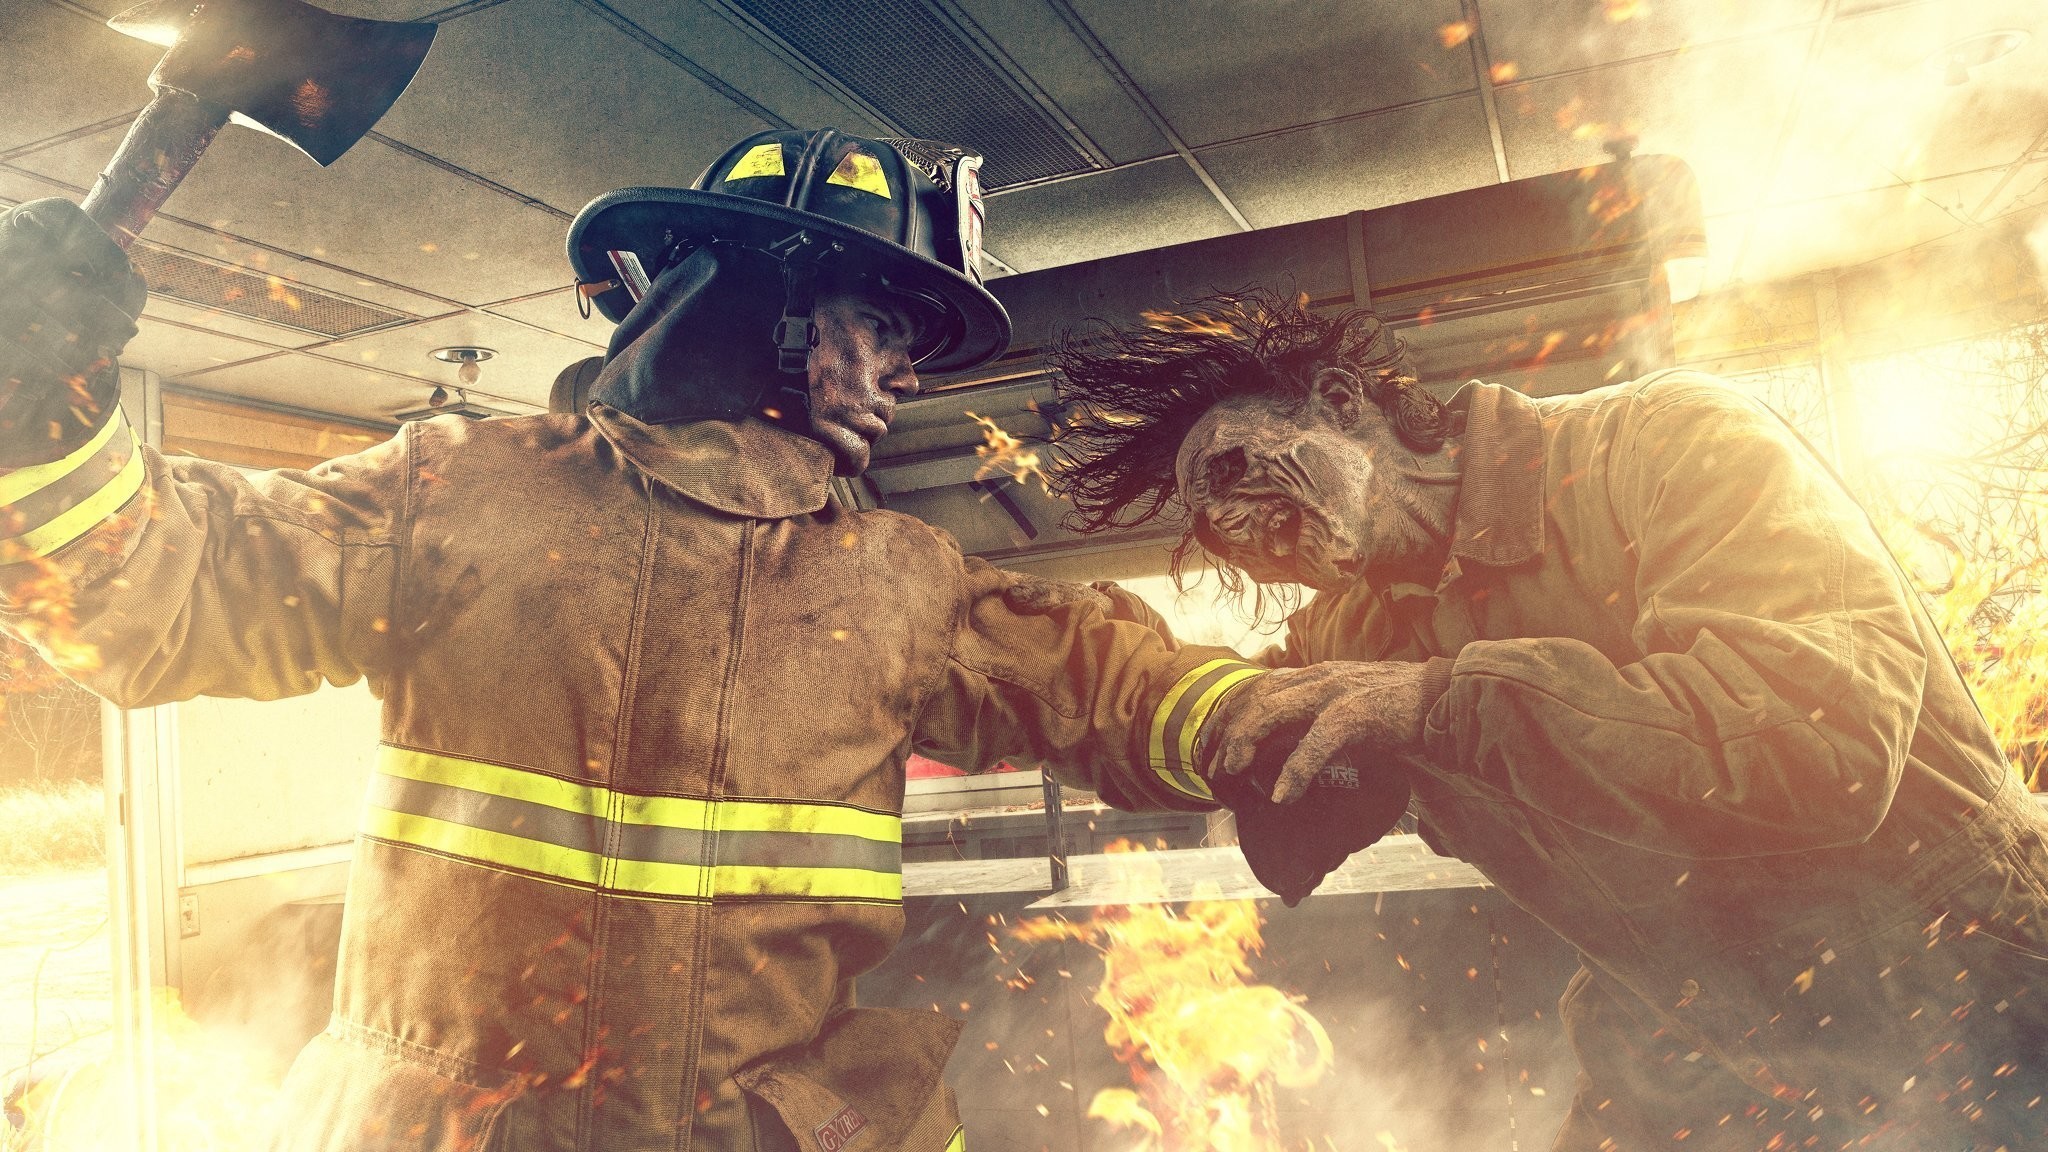 2048x1152 Hd firefighter wallpaper pic wpxh 2